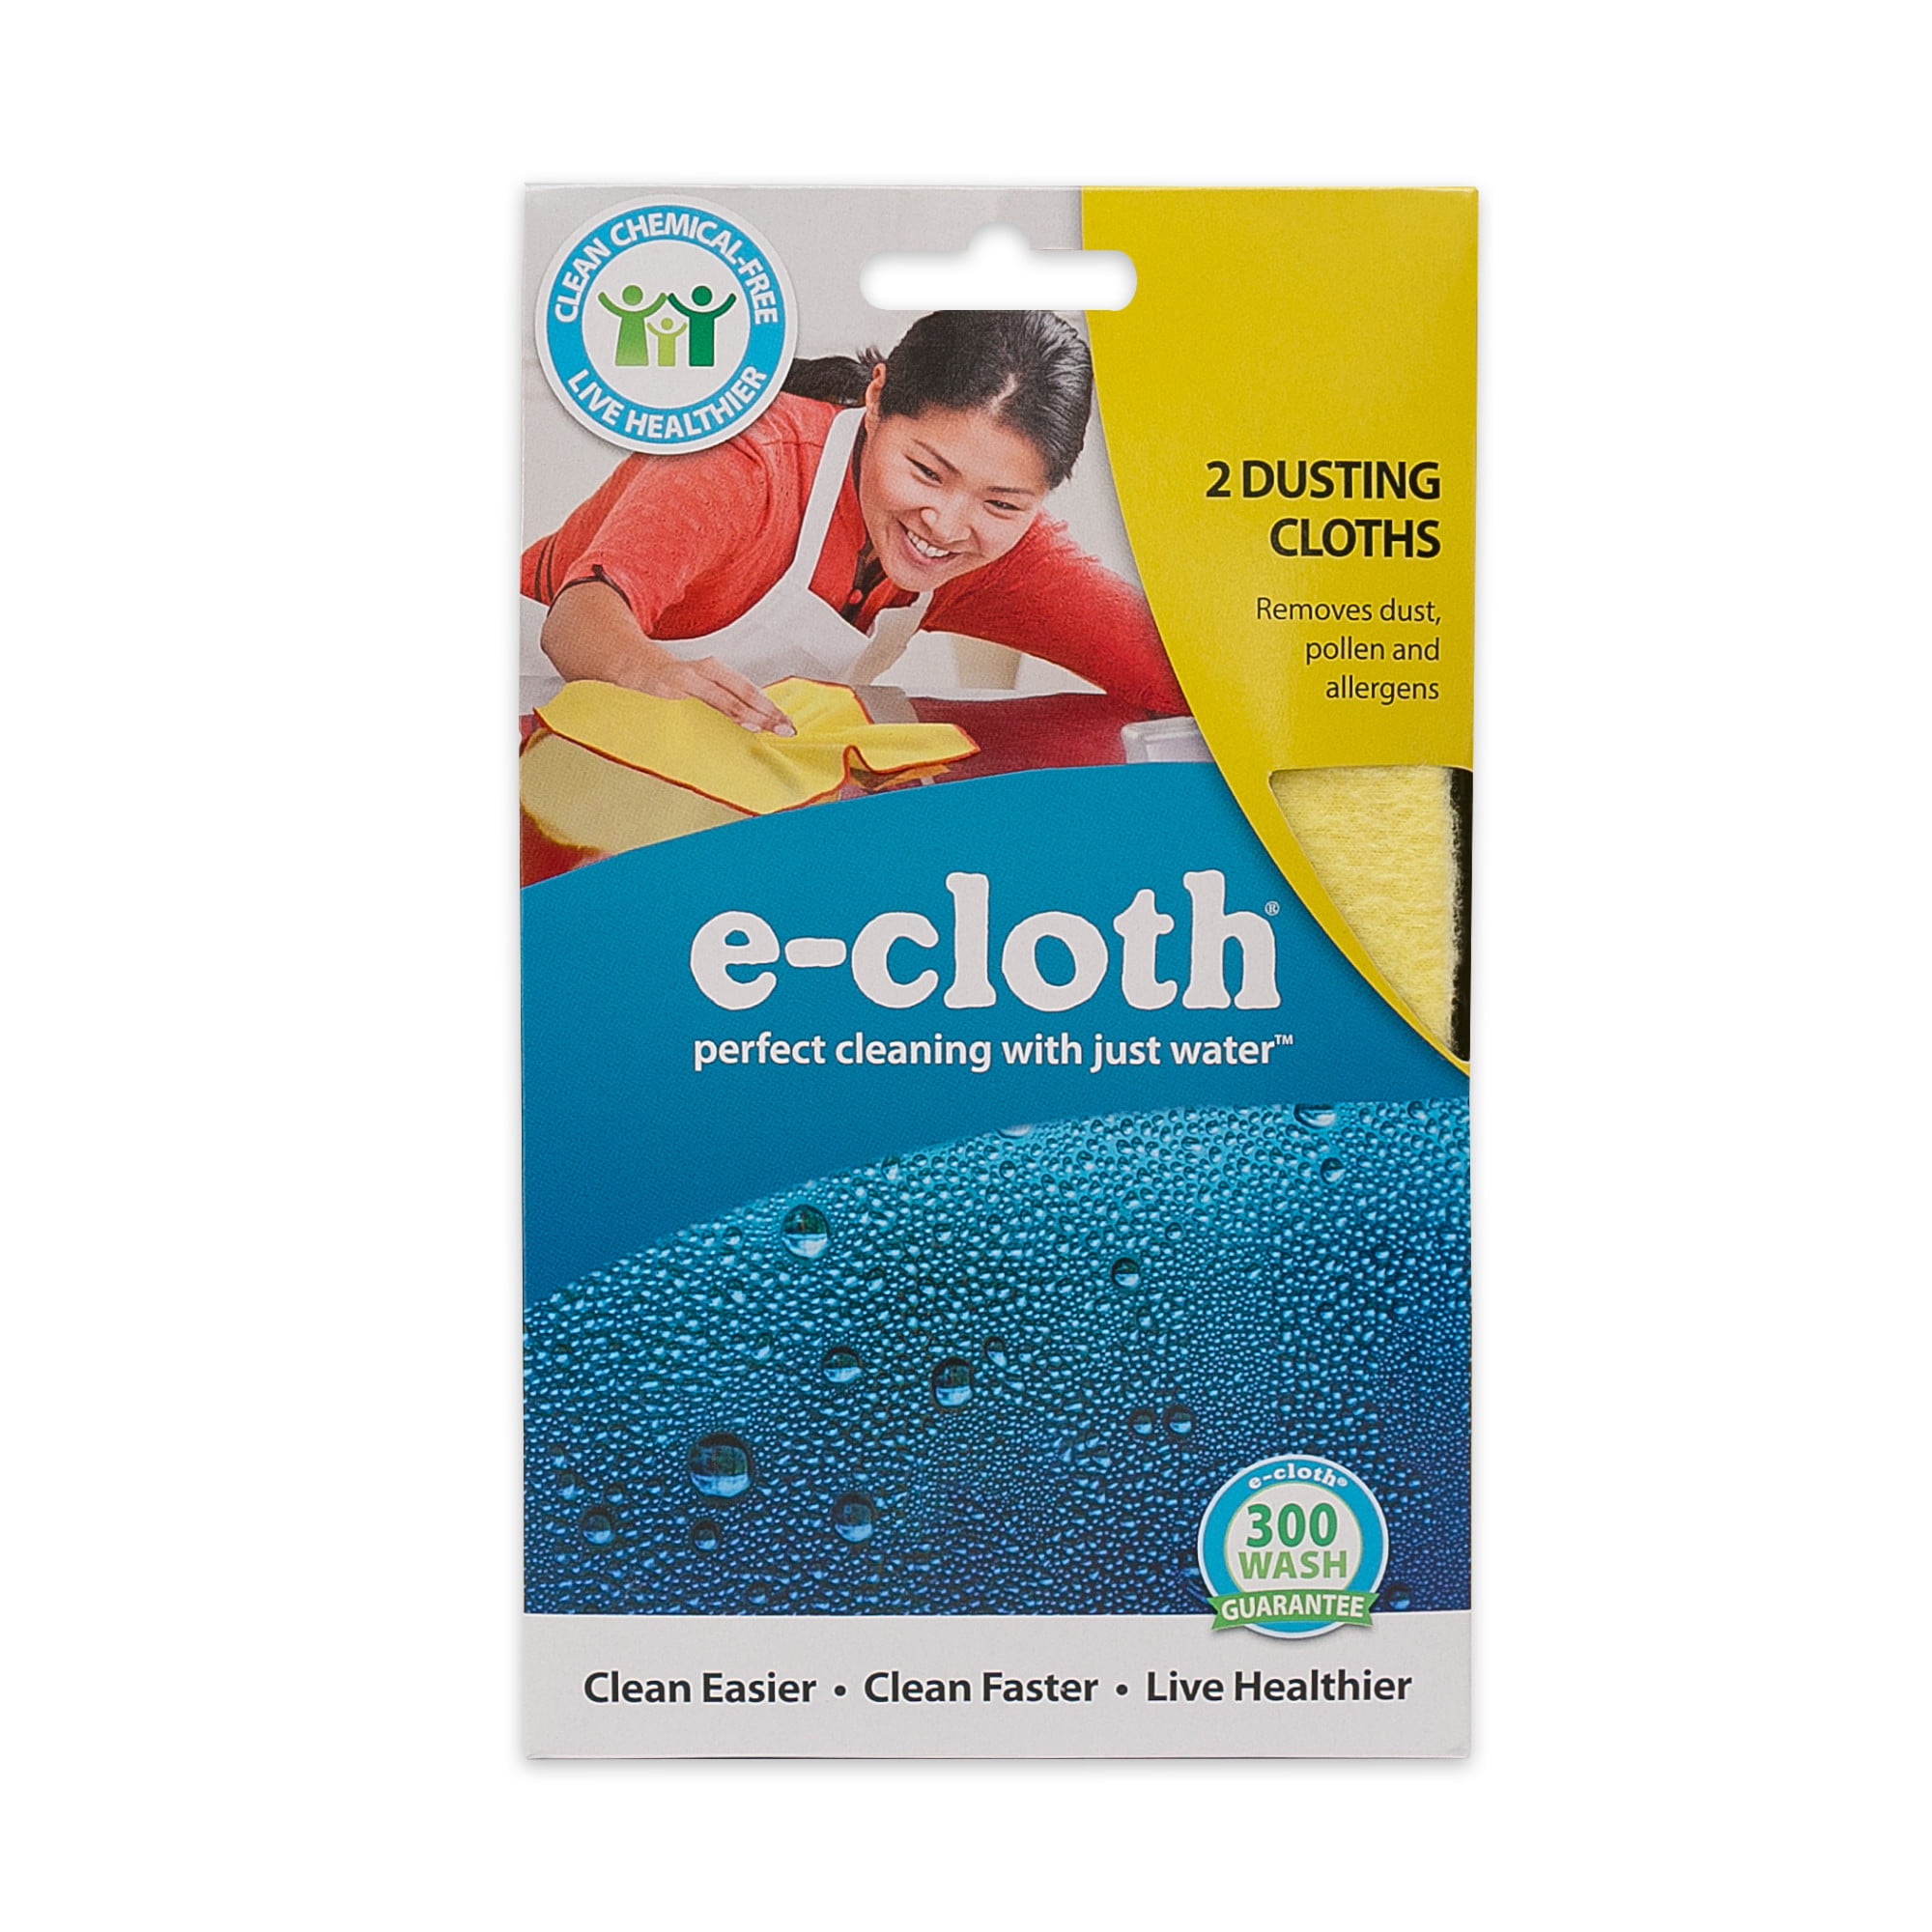 E-Cloth Dusting Cloth - 100% Polyester - 2 Pack | Walmart Canada